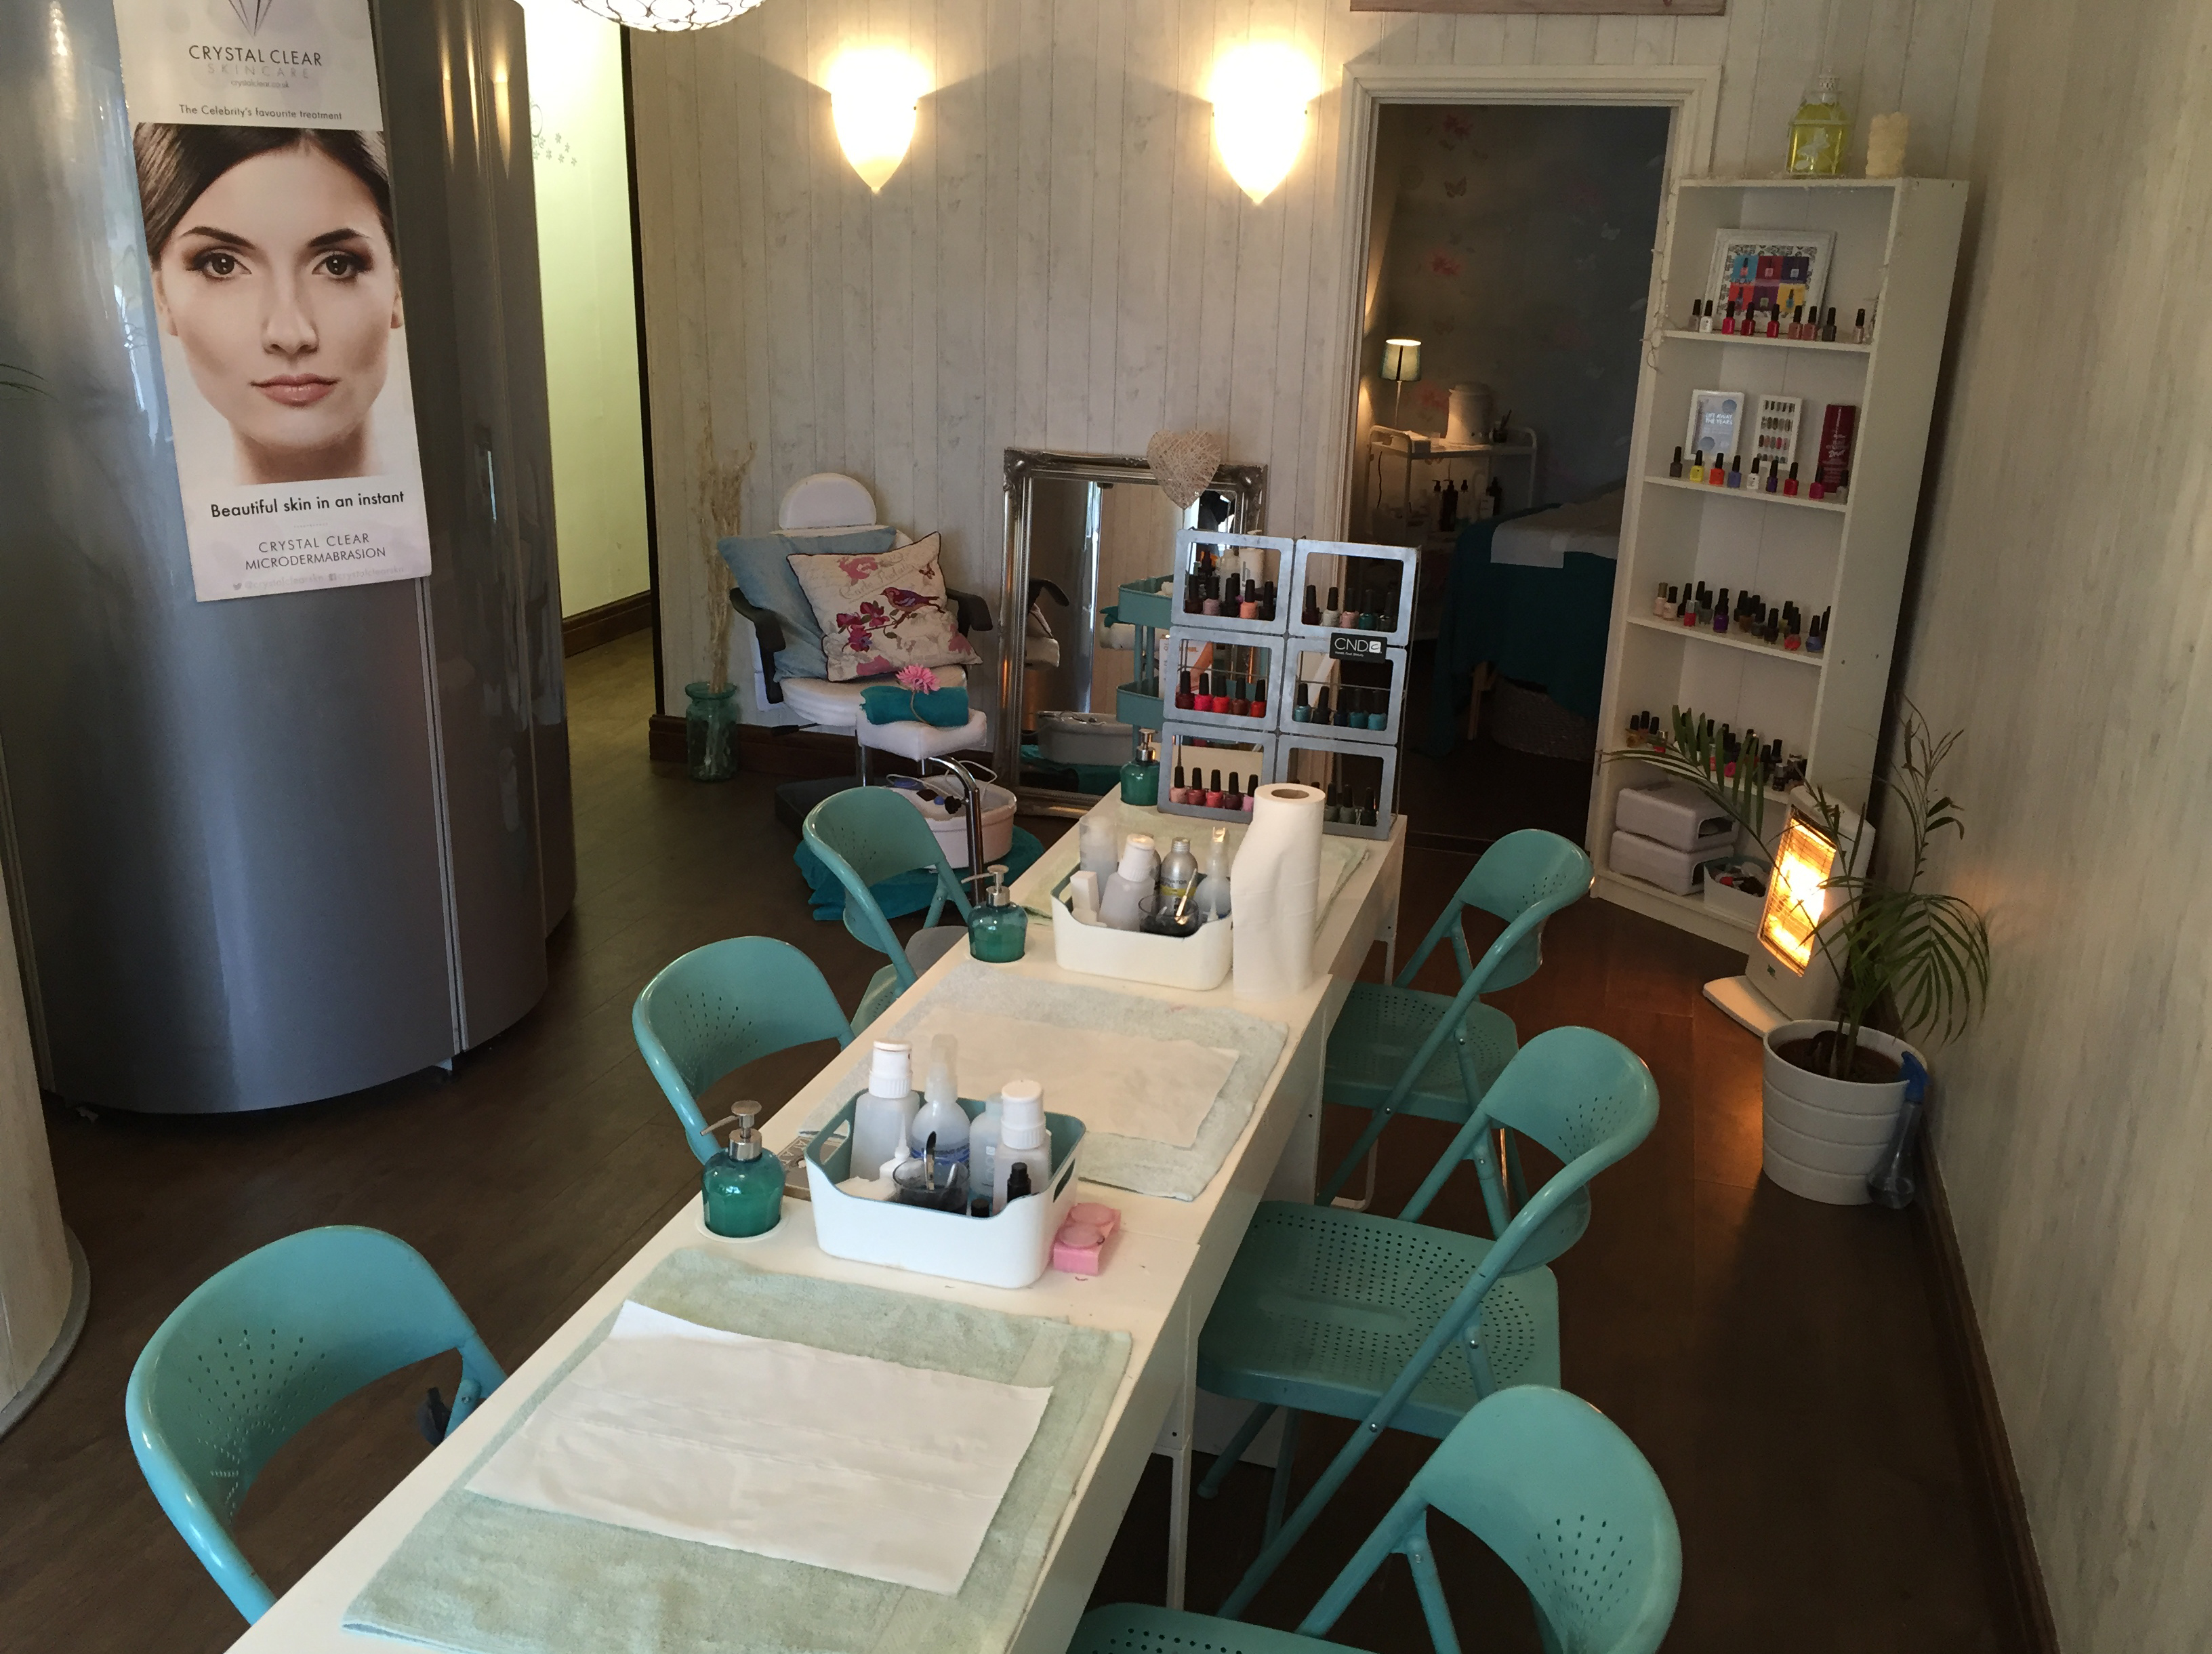 A look inside The Pamper Lounge